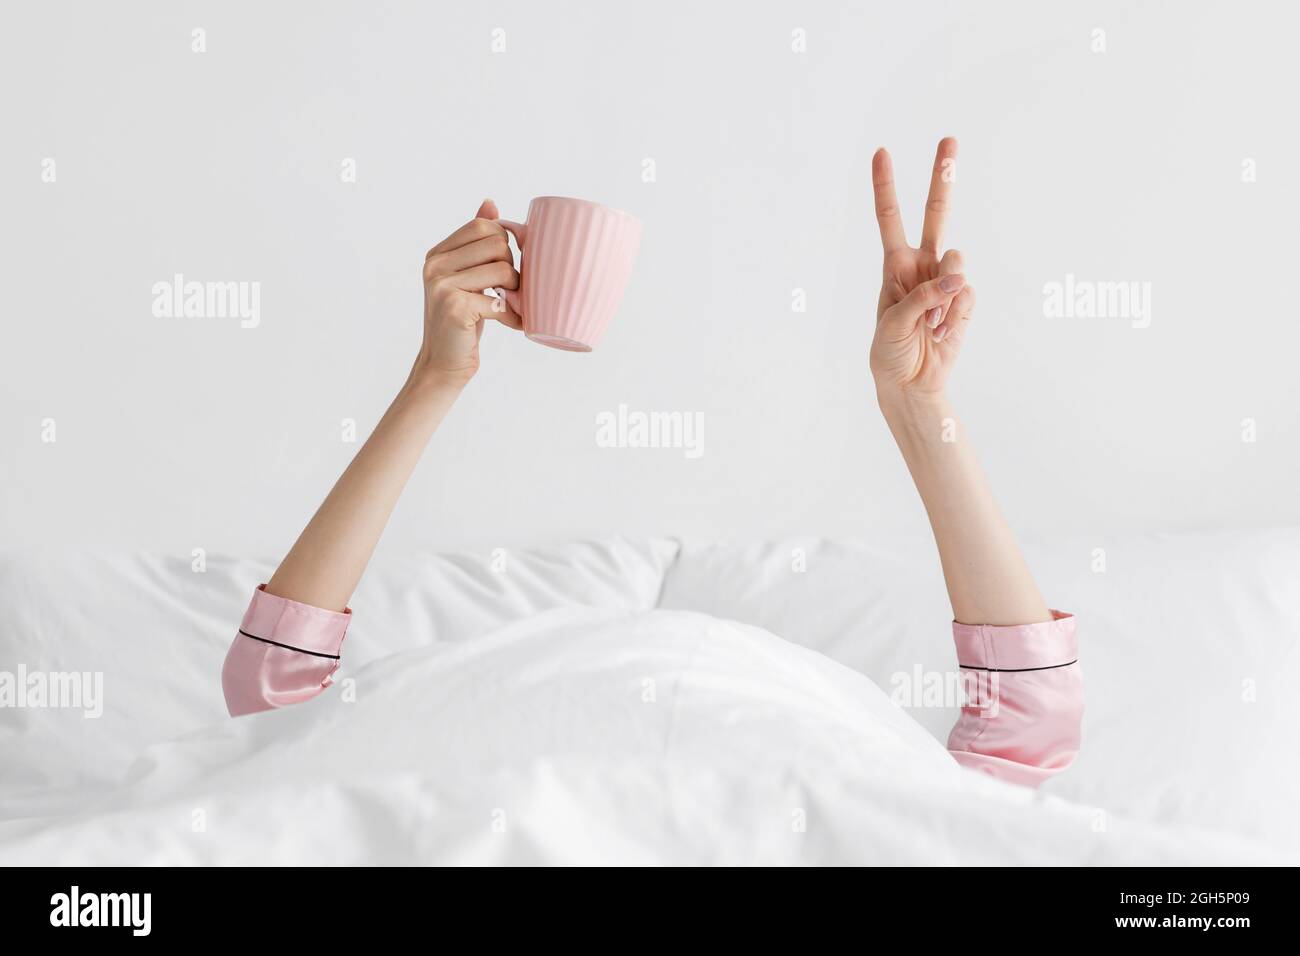 Positive mood, good morning with tasty coffee, rest and relax on vacation Stock Photo